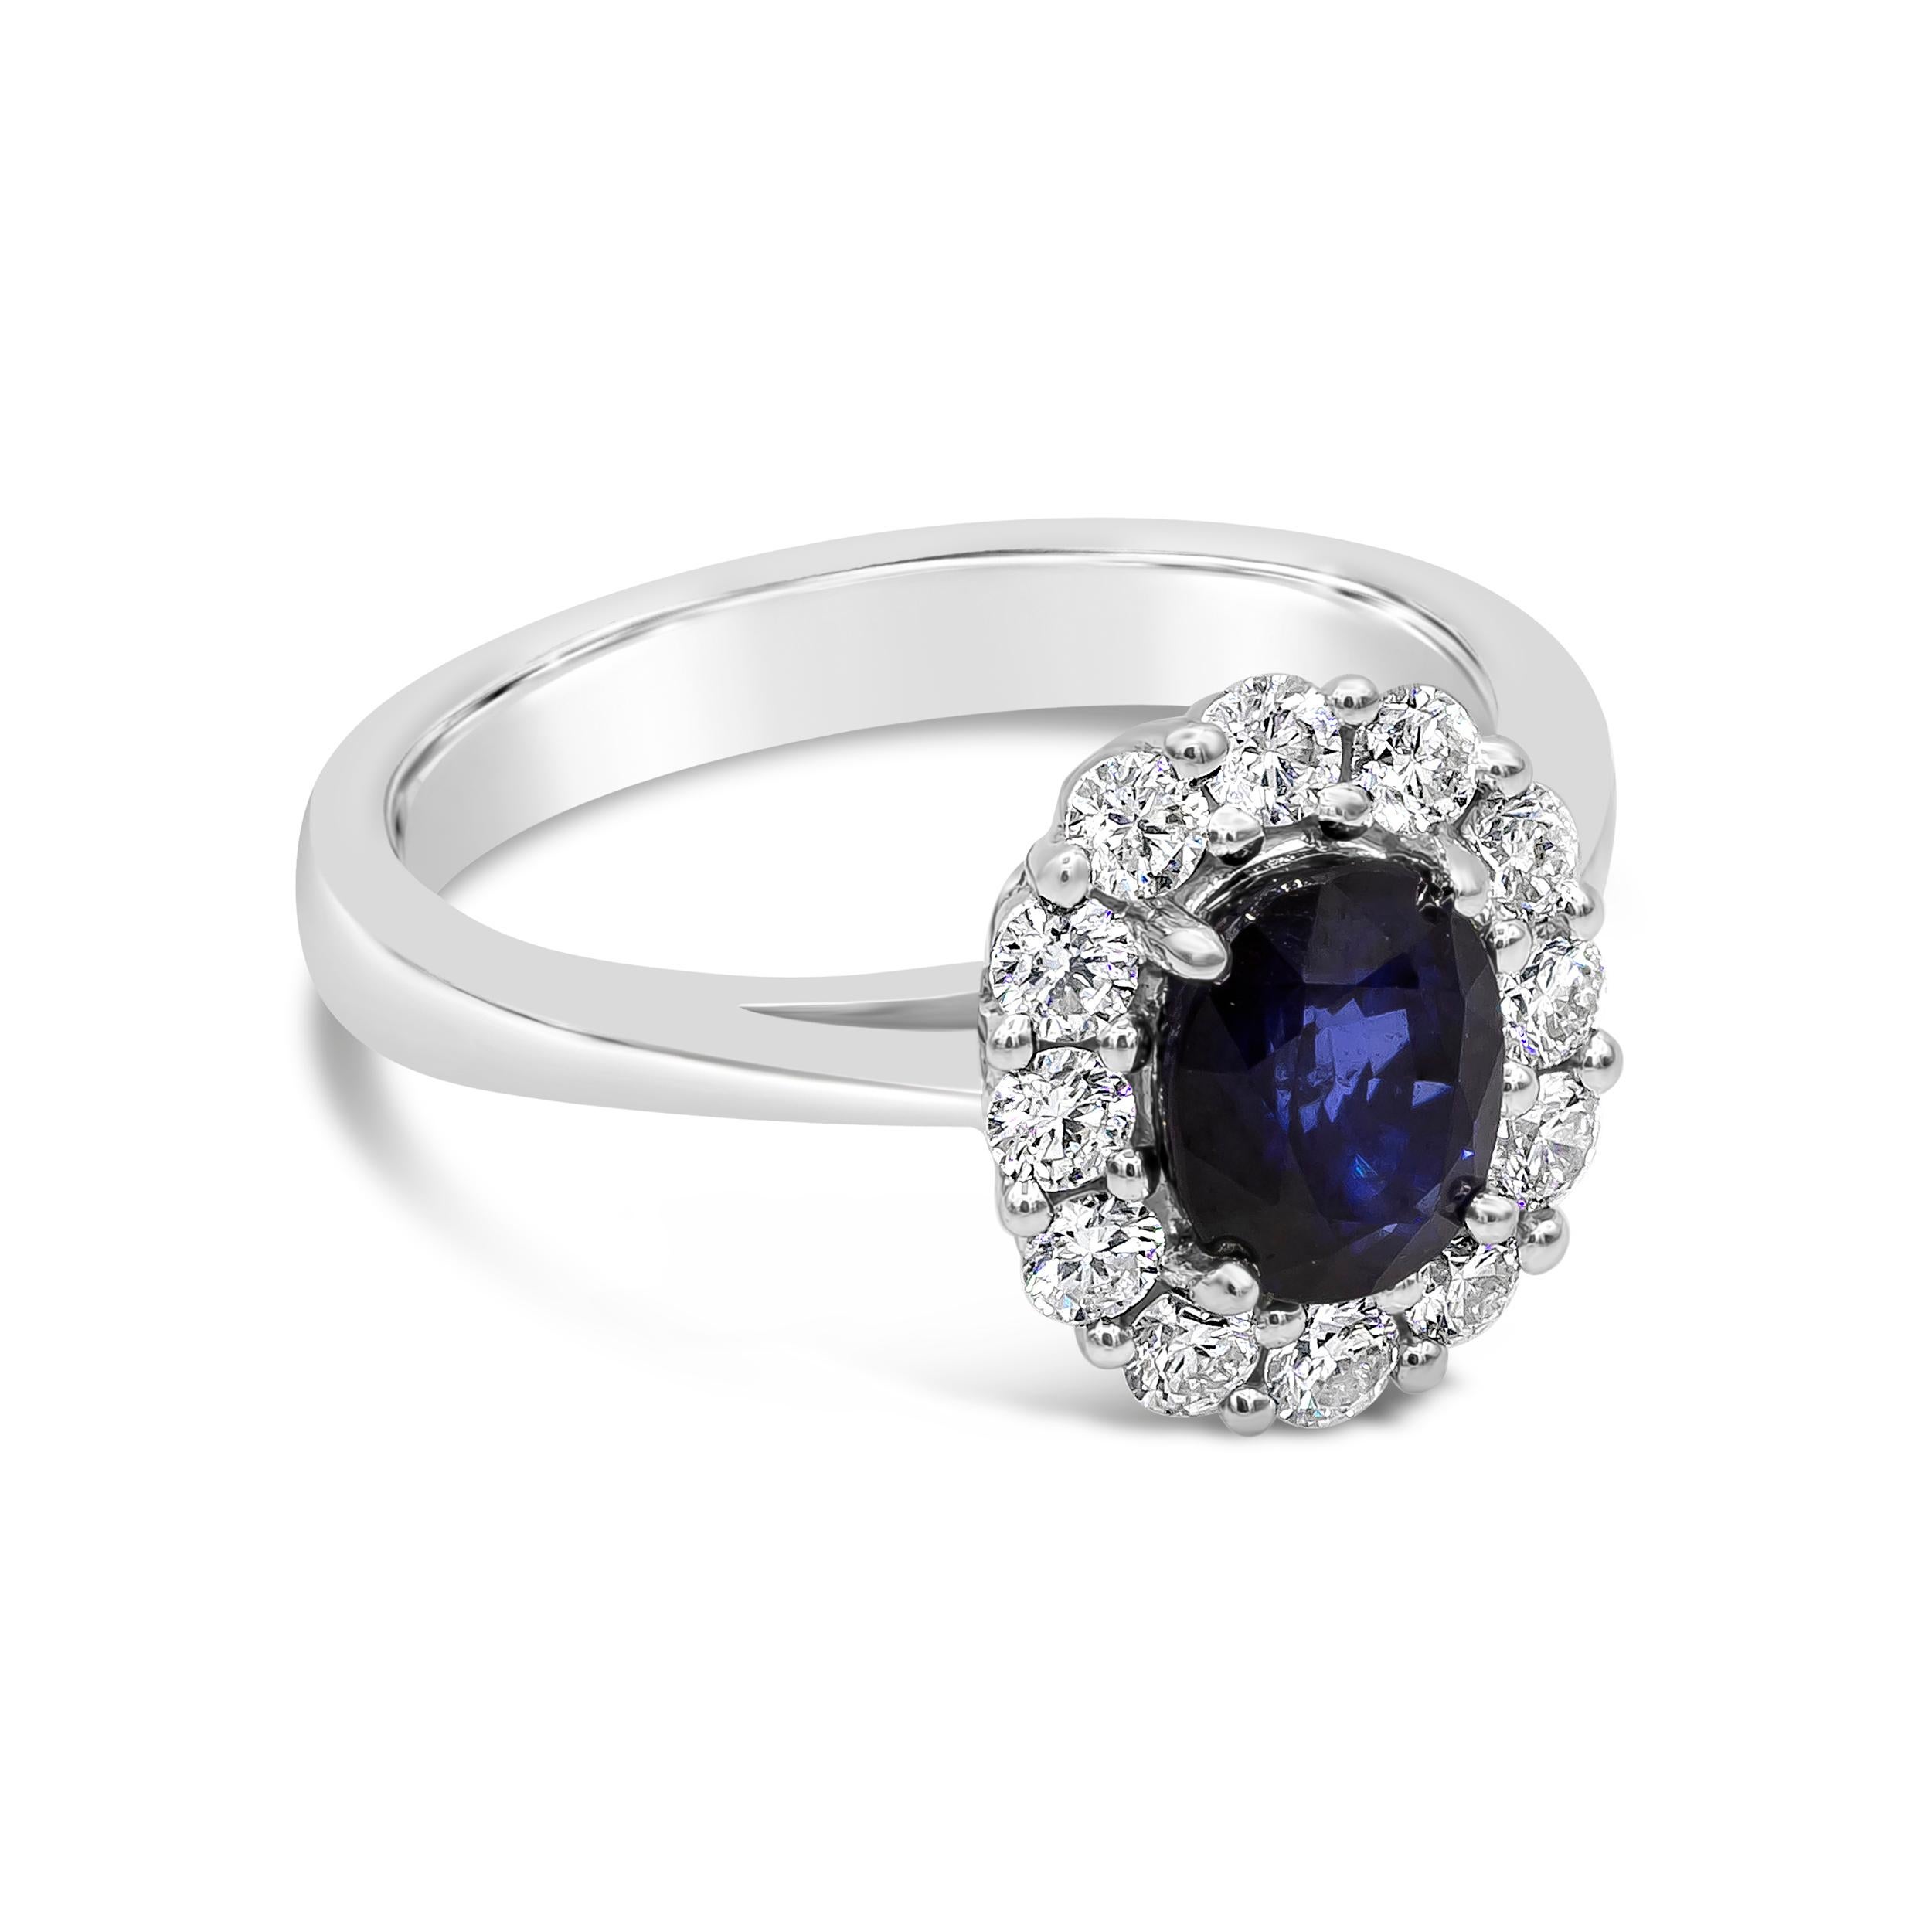 An elegant and classic engagement ring showcasing a 1.60 carat oval cut blue sapphire, surrounded by a single row of 12 round brilliant diamonds weighing 0.54 carats total. Finely made in 18k White Gold. Size 6.5 US resizable upon request.

Roman